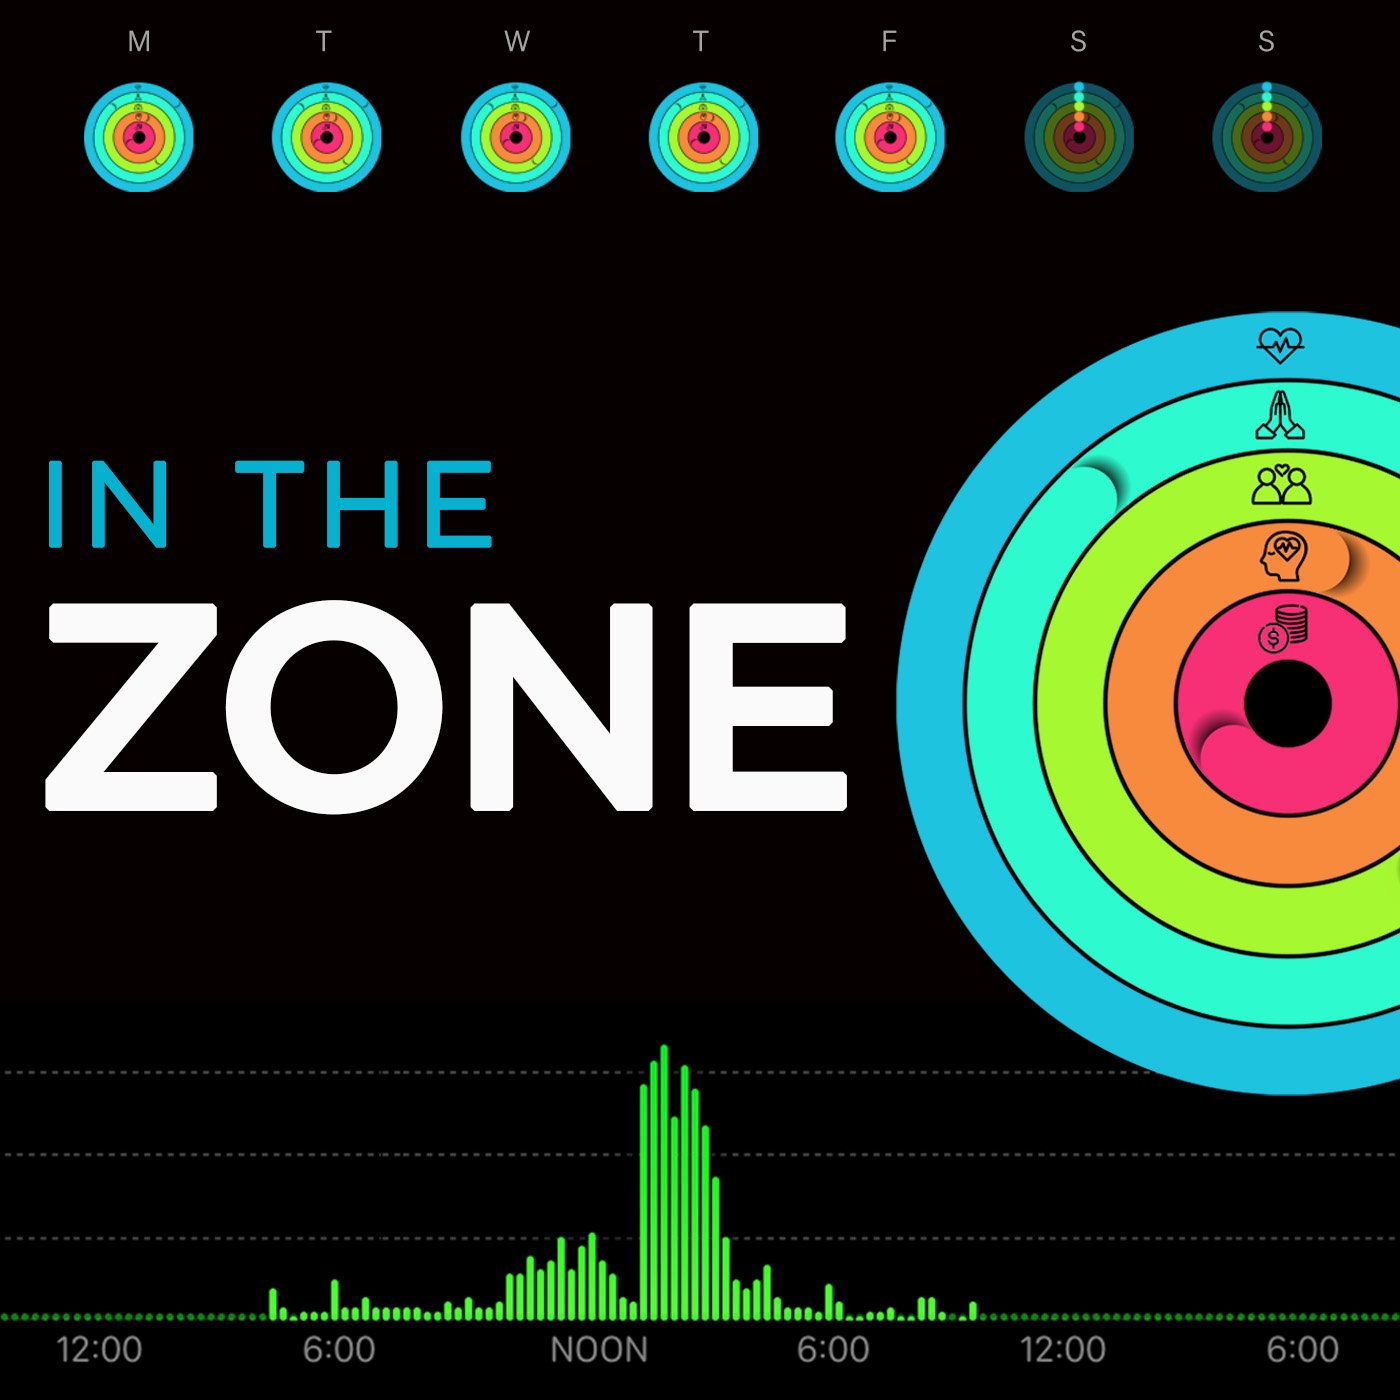 IN THE ZONE: In the Financial Zone